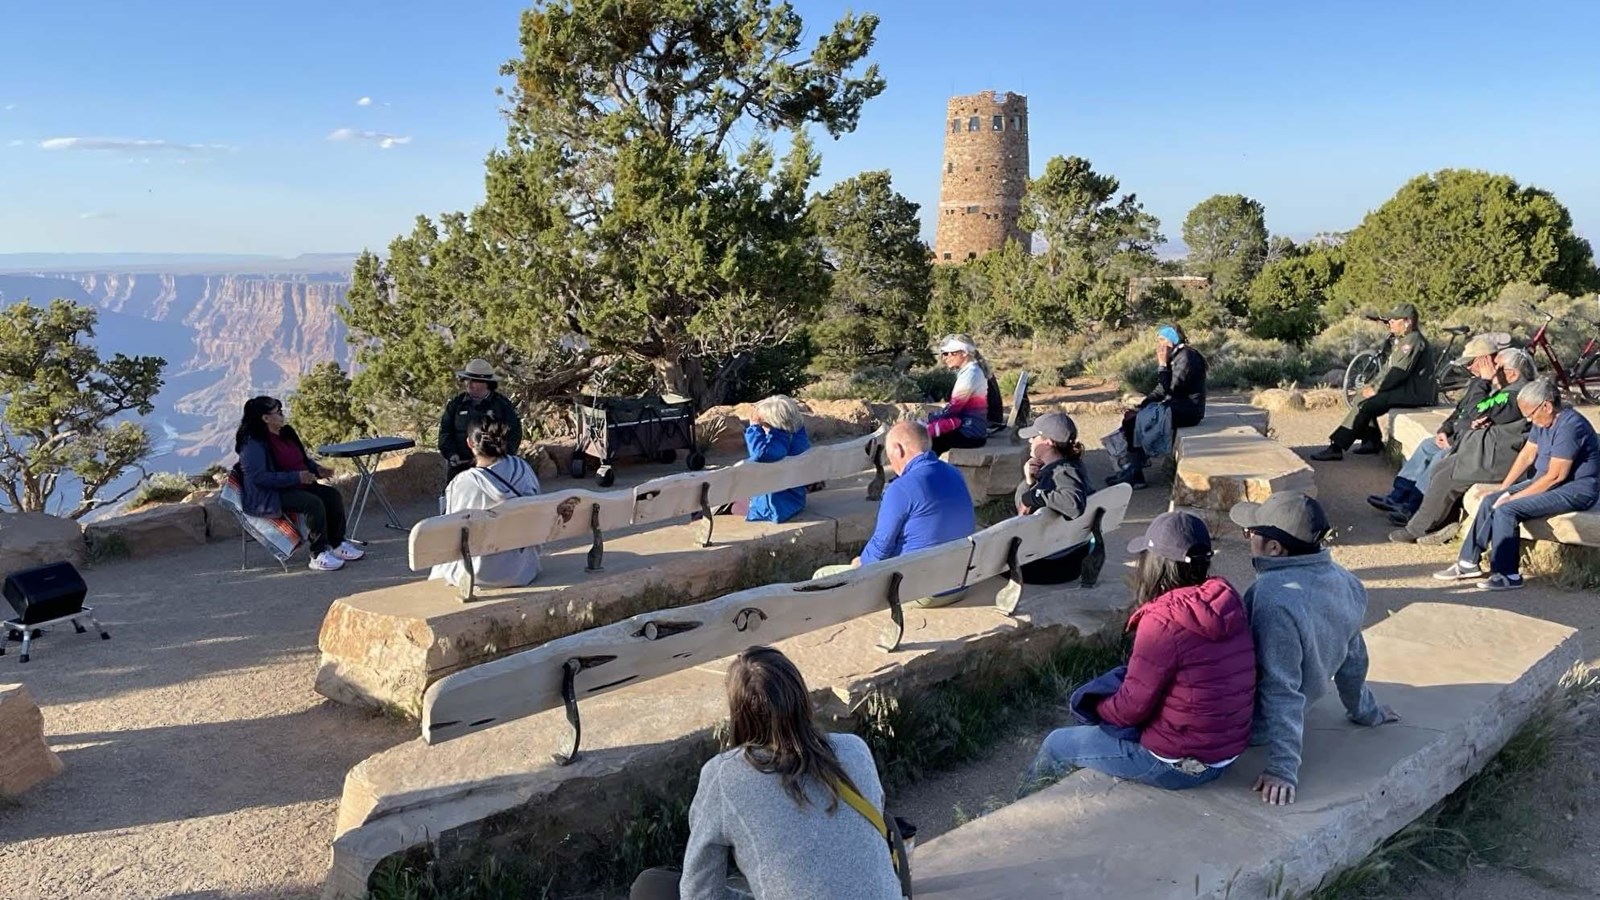 15 people are sitting on stone slab benches in an outdoor amphitheater on the edge of the canyon.